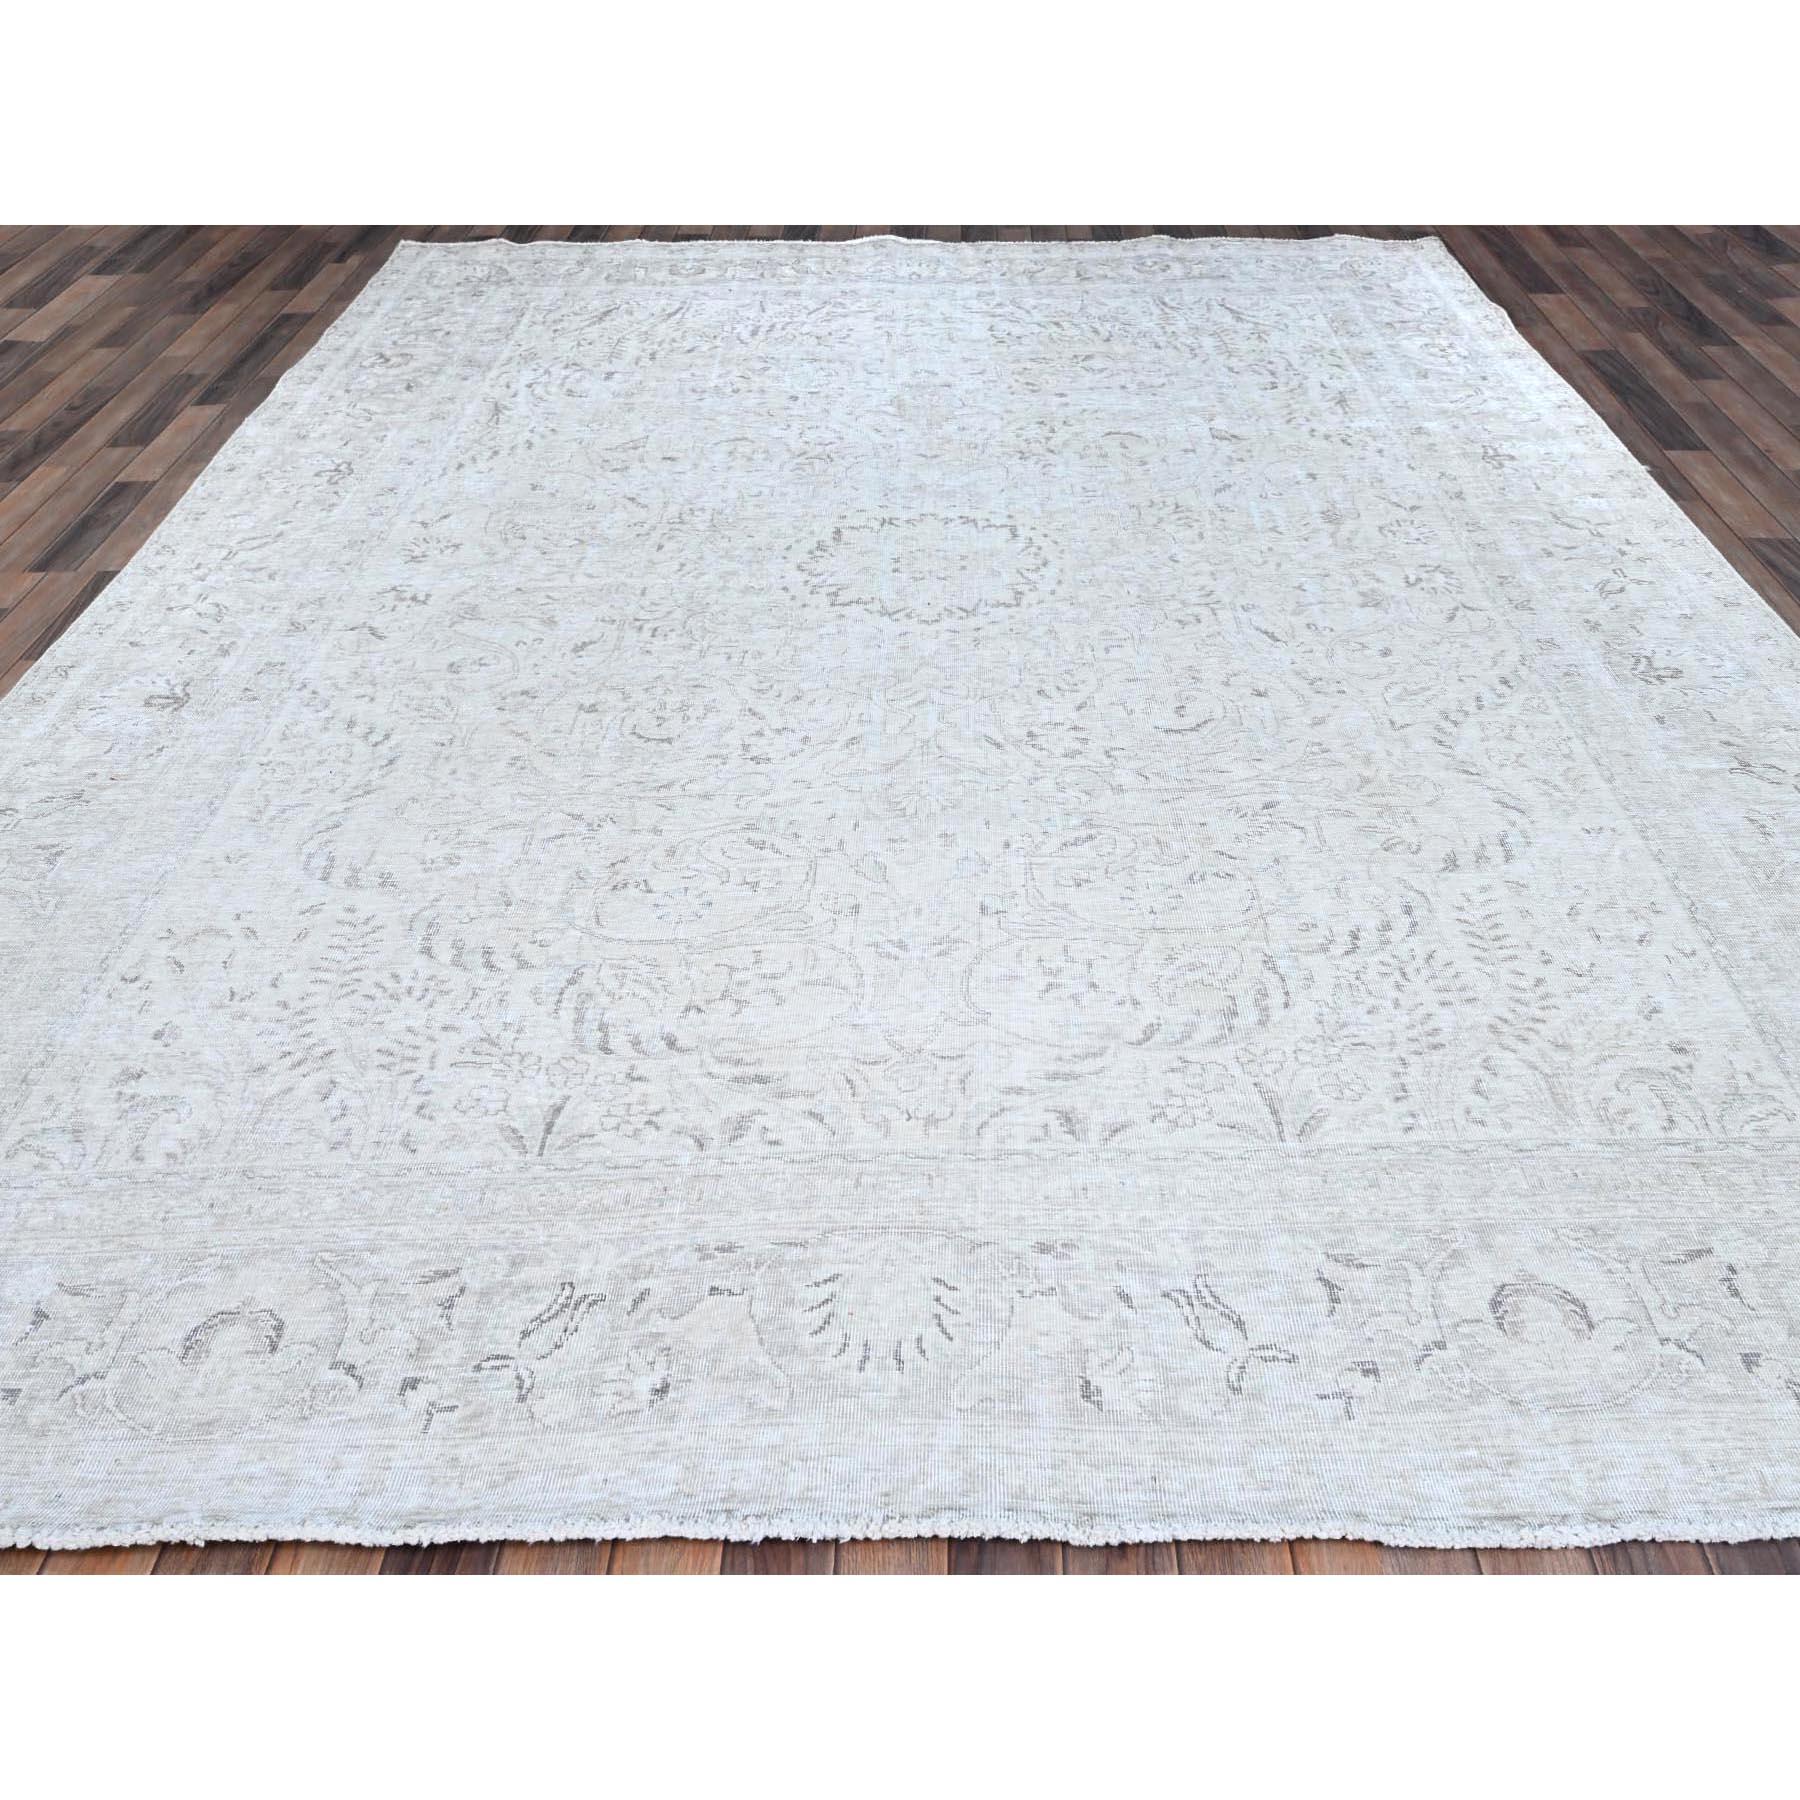 Medieval Ivory Vintage Persian Tabriz Seared Low Clean Hand Knotted Evenly Worn Wool Rug